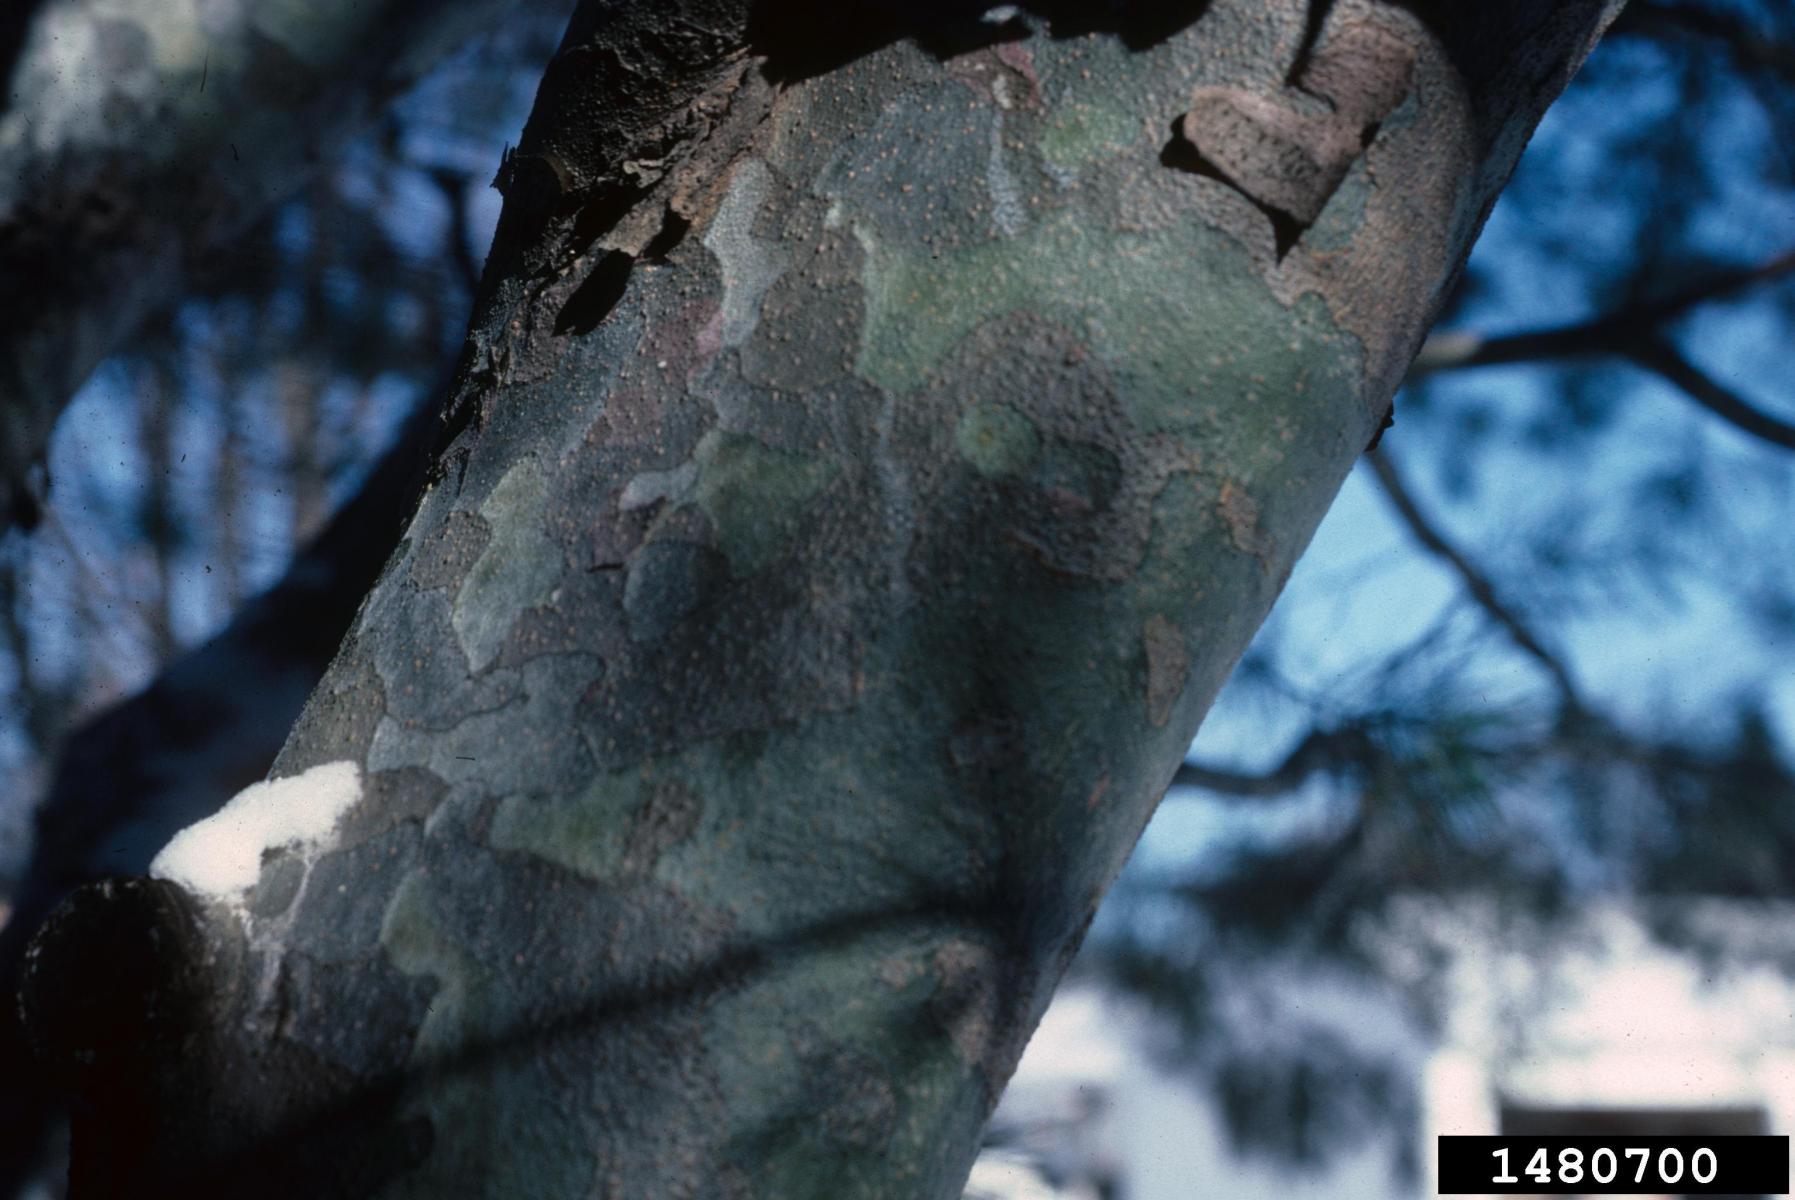  The photo of the bark on Lacebark pine on the right is from: Richard Webb, Bugwood.org